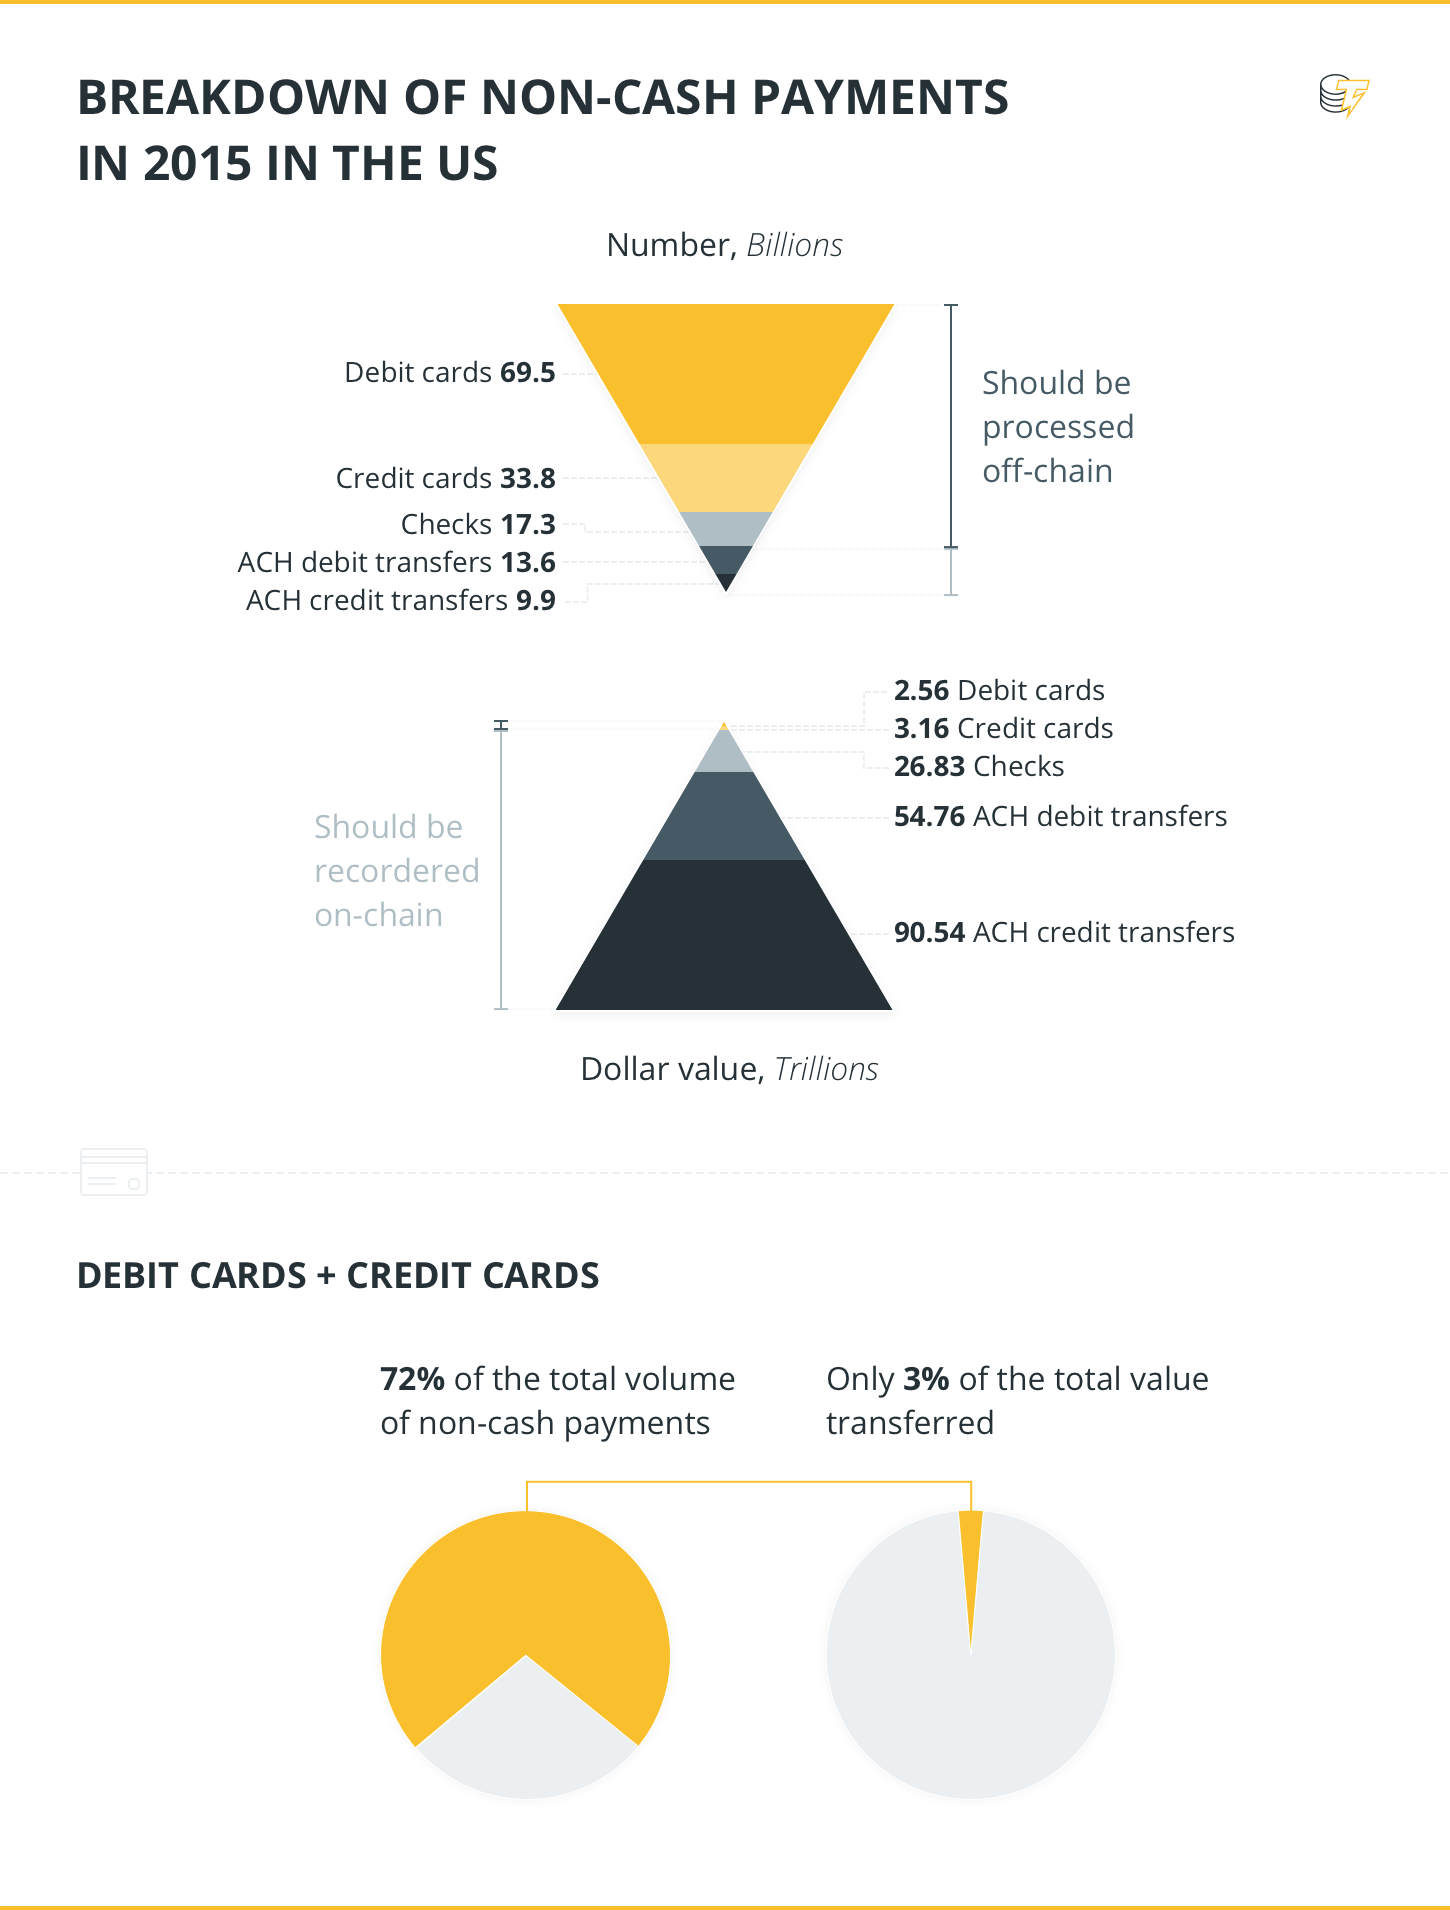 Breakdown of non-cash payments in 2015 in the US